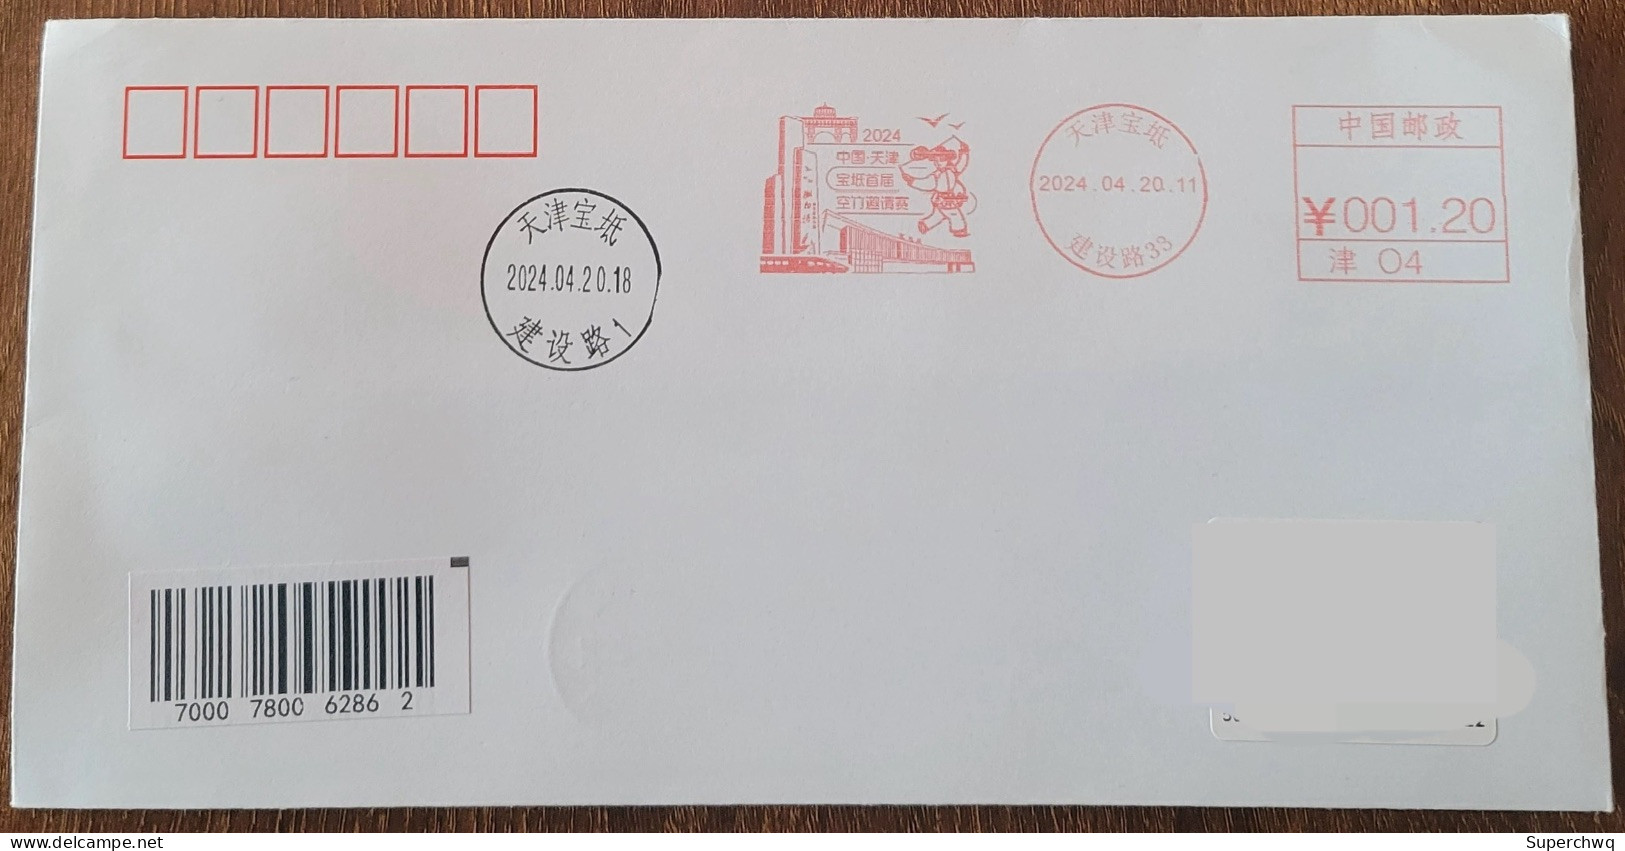 China Cover The First Tianjin Baodi Diabolo Invitational (Tianjin) Was Stamped With Postage On The First Day Of Actual D - Cartes Postales